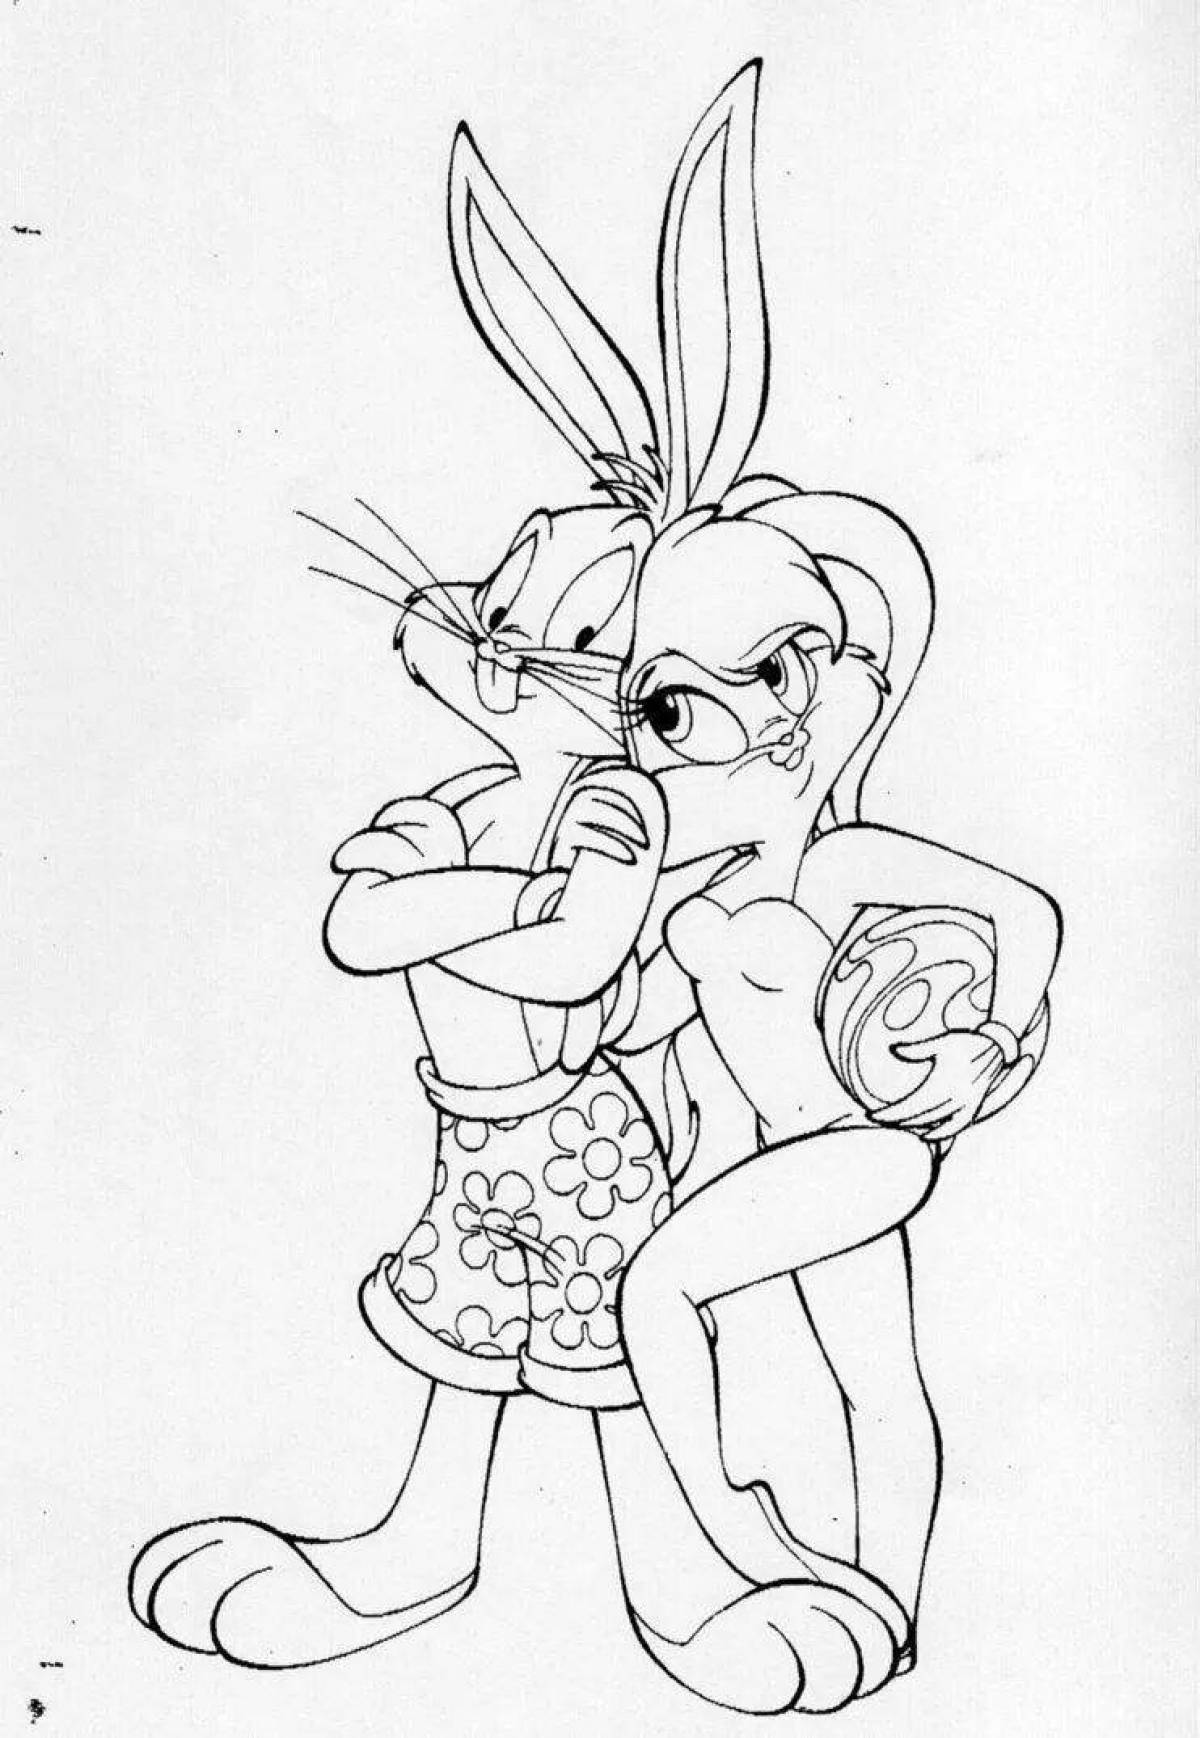 Zany bugs bunny coloring page